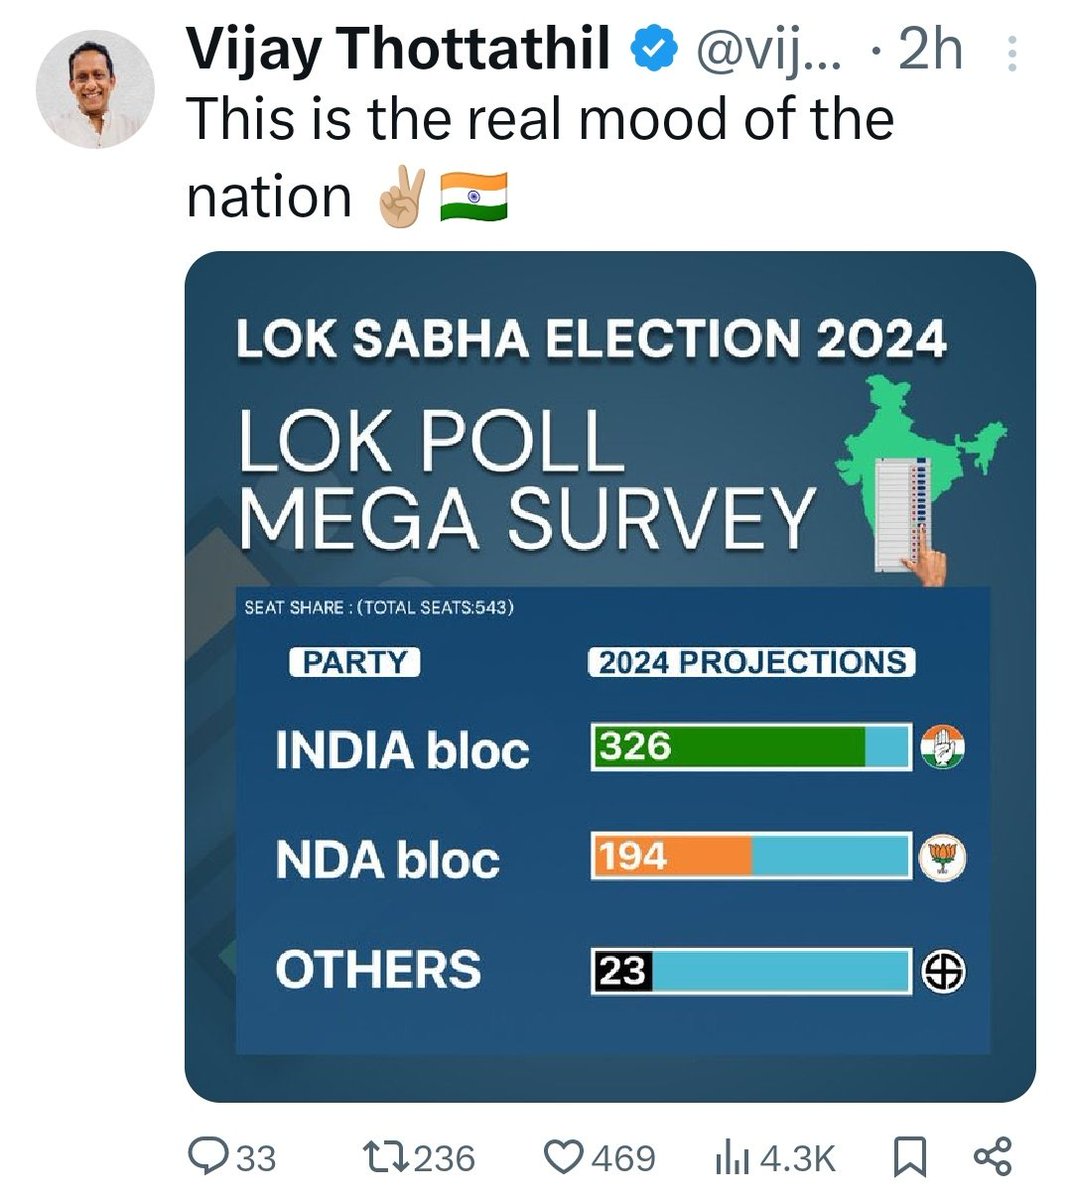 Friends, Beware of such false posts by @INCIndia handles.... They post it, let it spread and then silently delete and run away.... The only way to let them taste the reality is, to go out in large numbers and cast our votes and let #BJP led #NDA win with thumping majority!!…